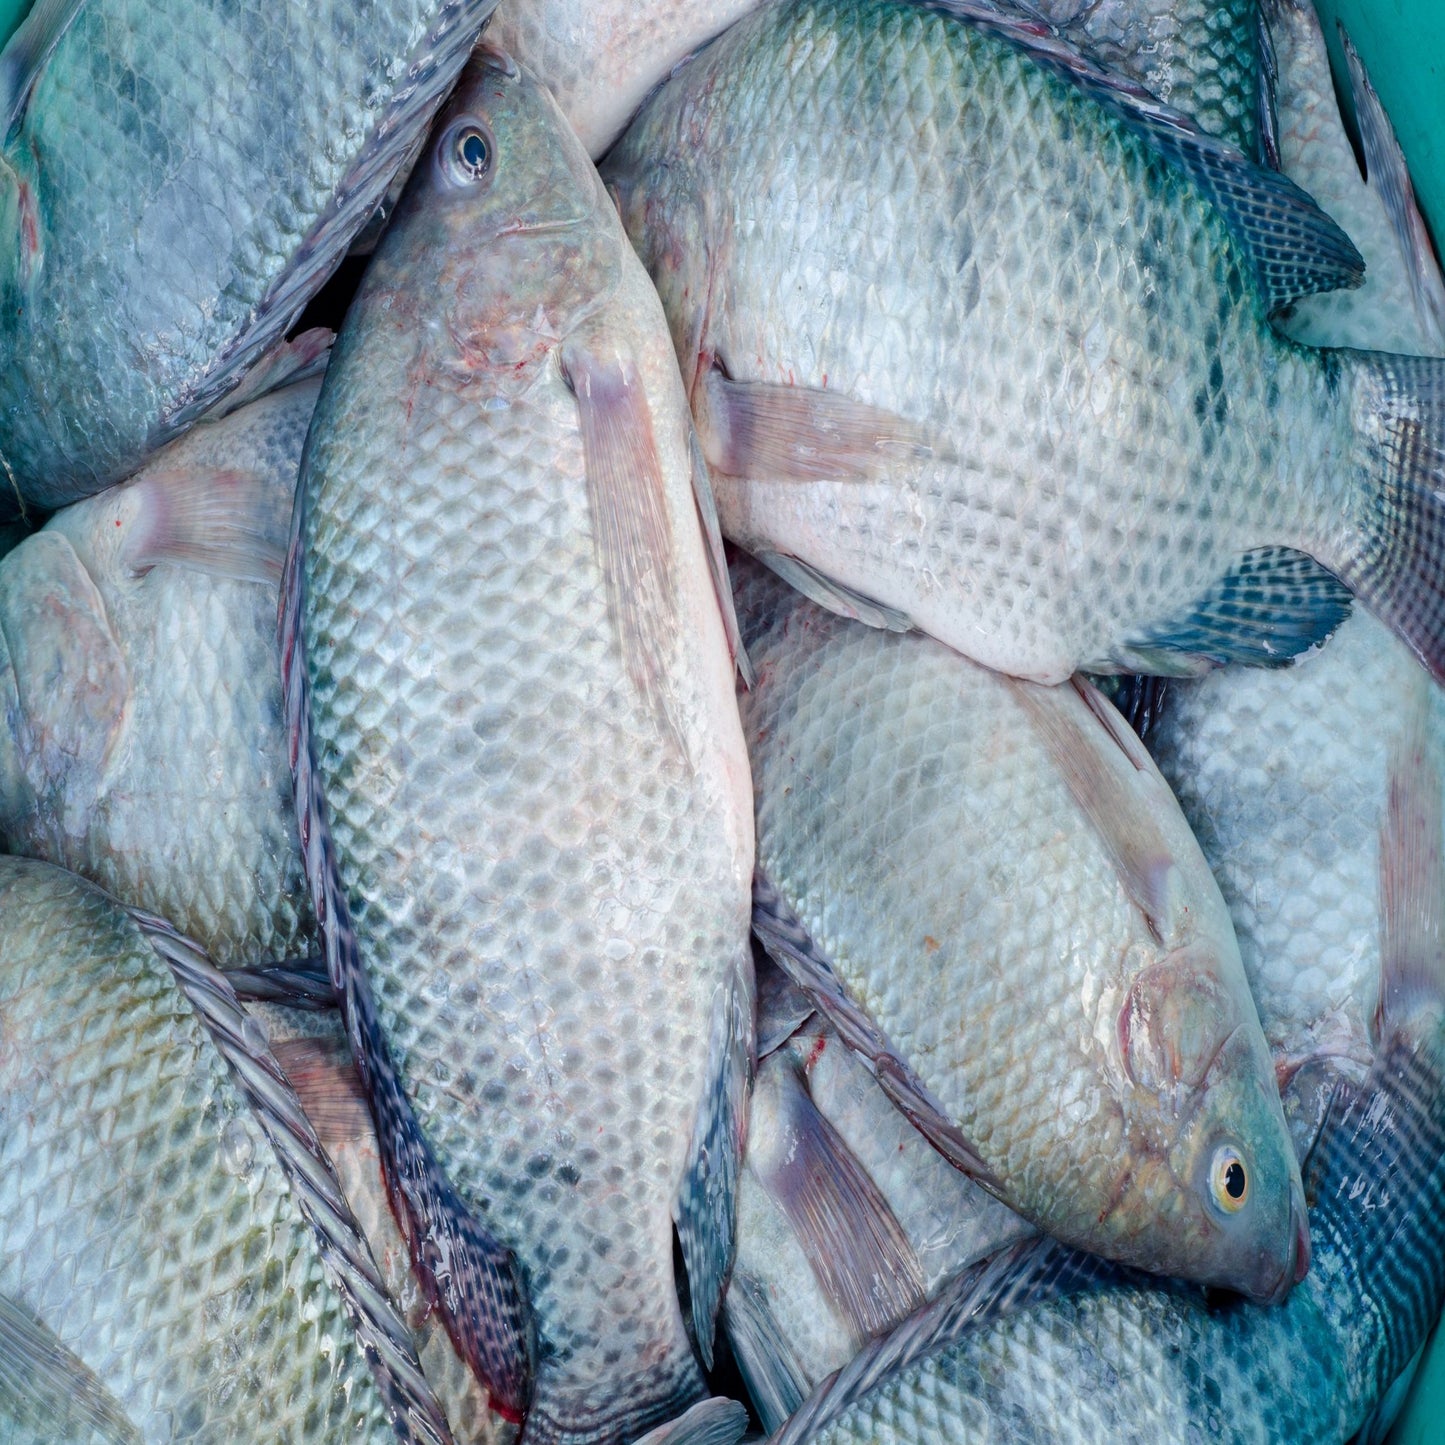 Freshwater tilapia, sold by Doof, and home delivered with care.